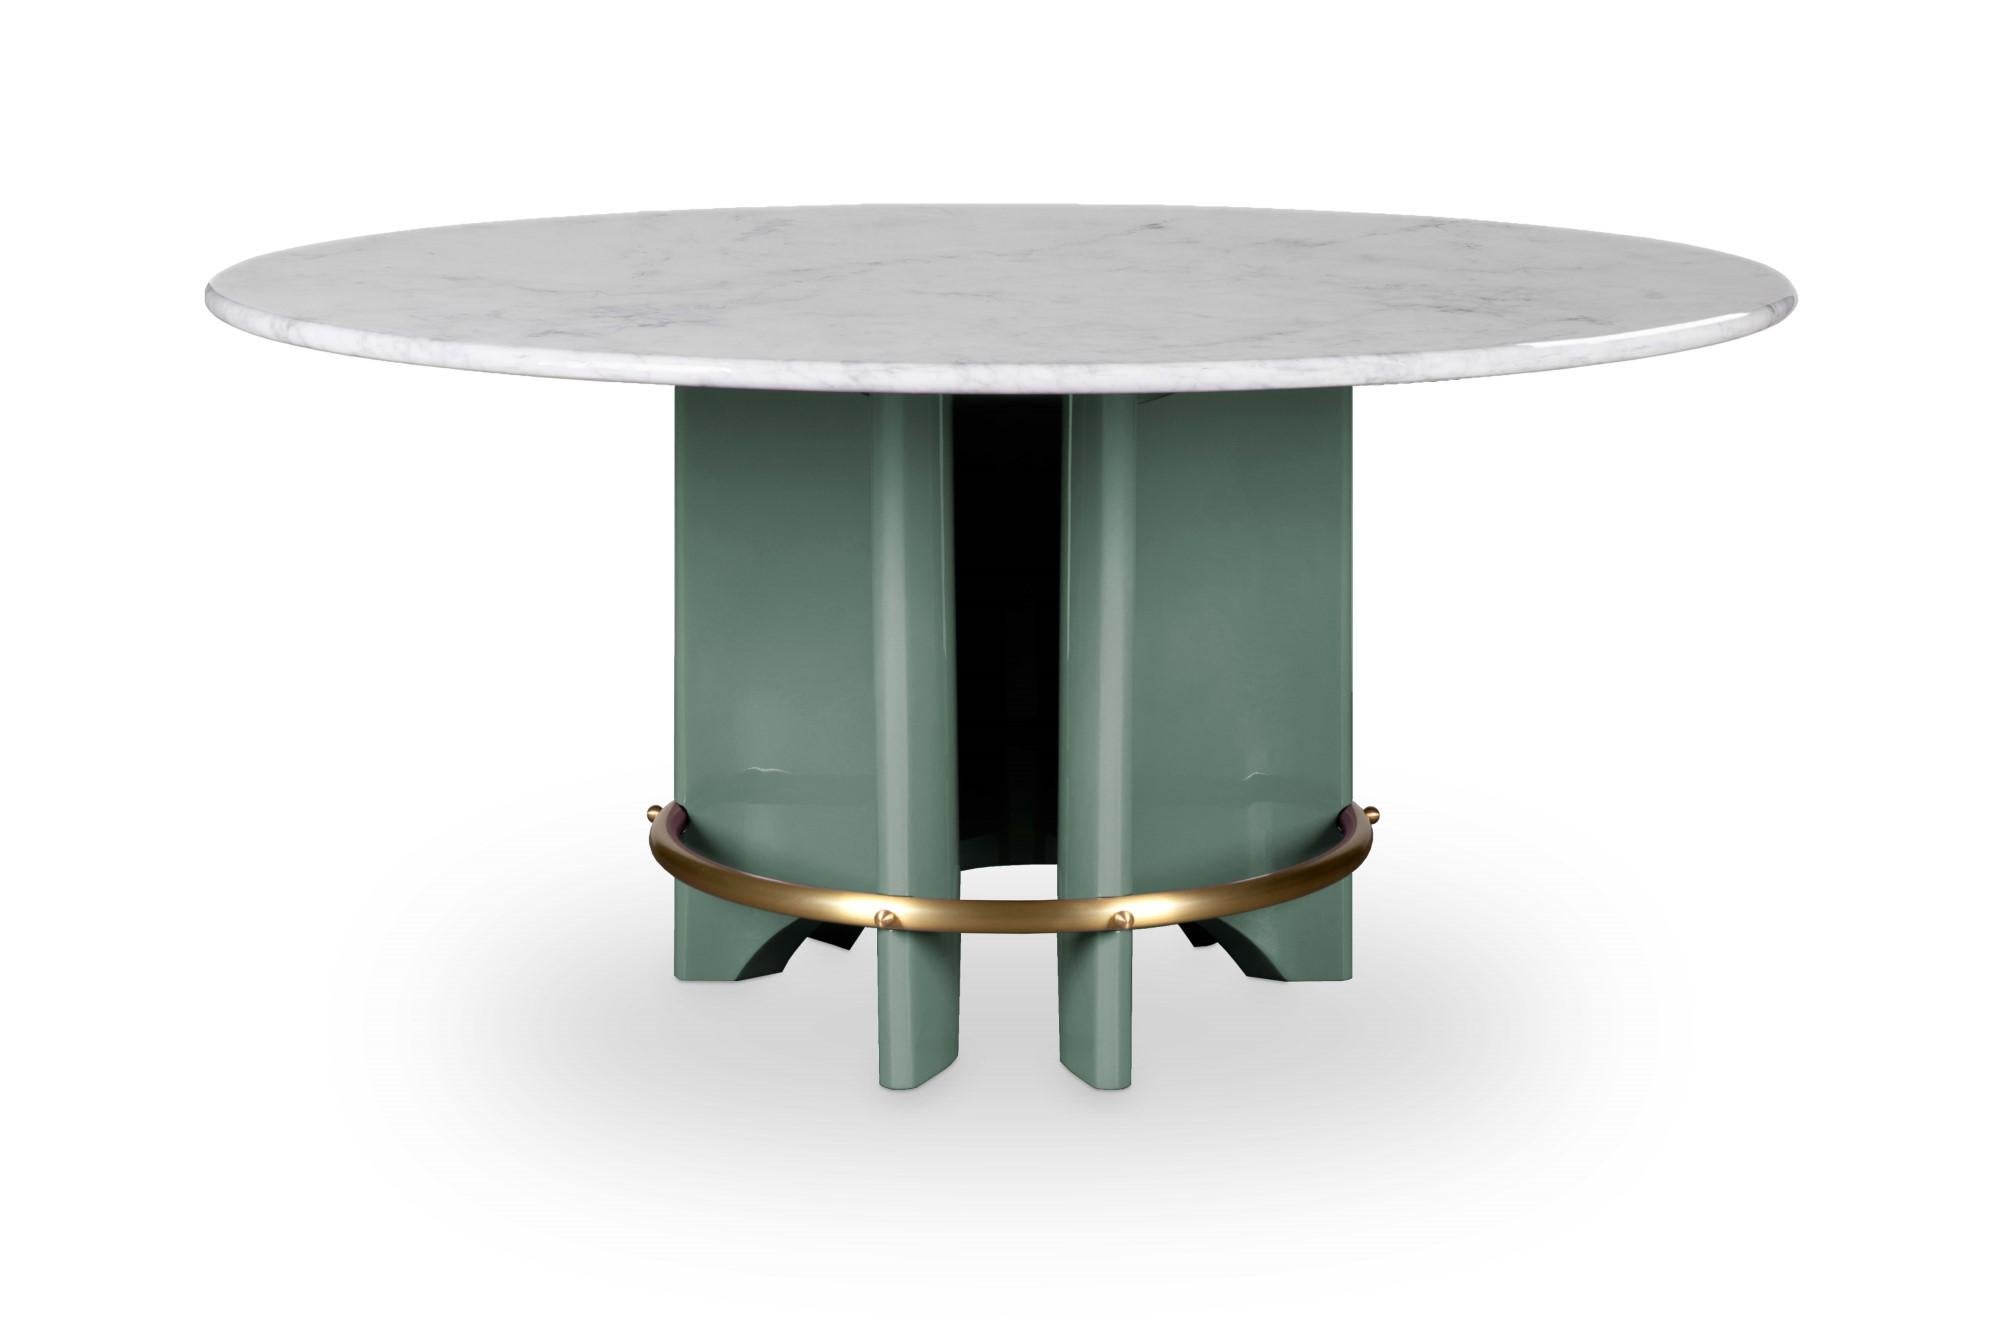 Meyer table by Royal Stranger
Dimensions: D 160 x W 160 x H 75 cm.
Materials: Carrara marble with polished finish, lilac lacquered with glossy finish base, brushed brass ring.

Available in:
Table Top: Carrara Marble, Nero Marquina, Estremoz,